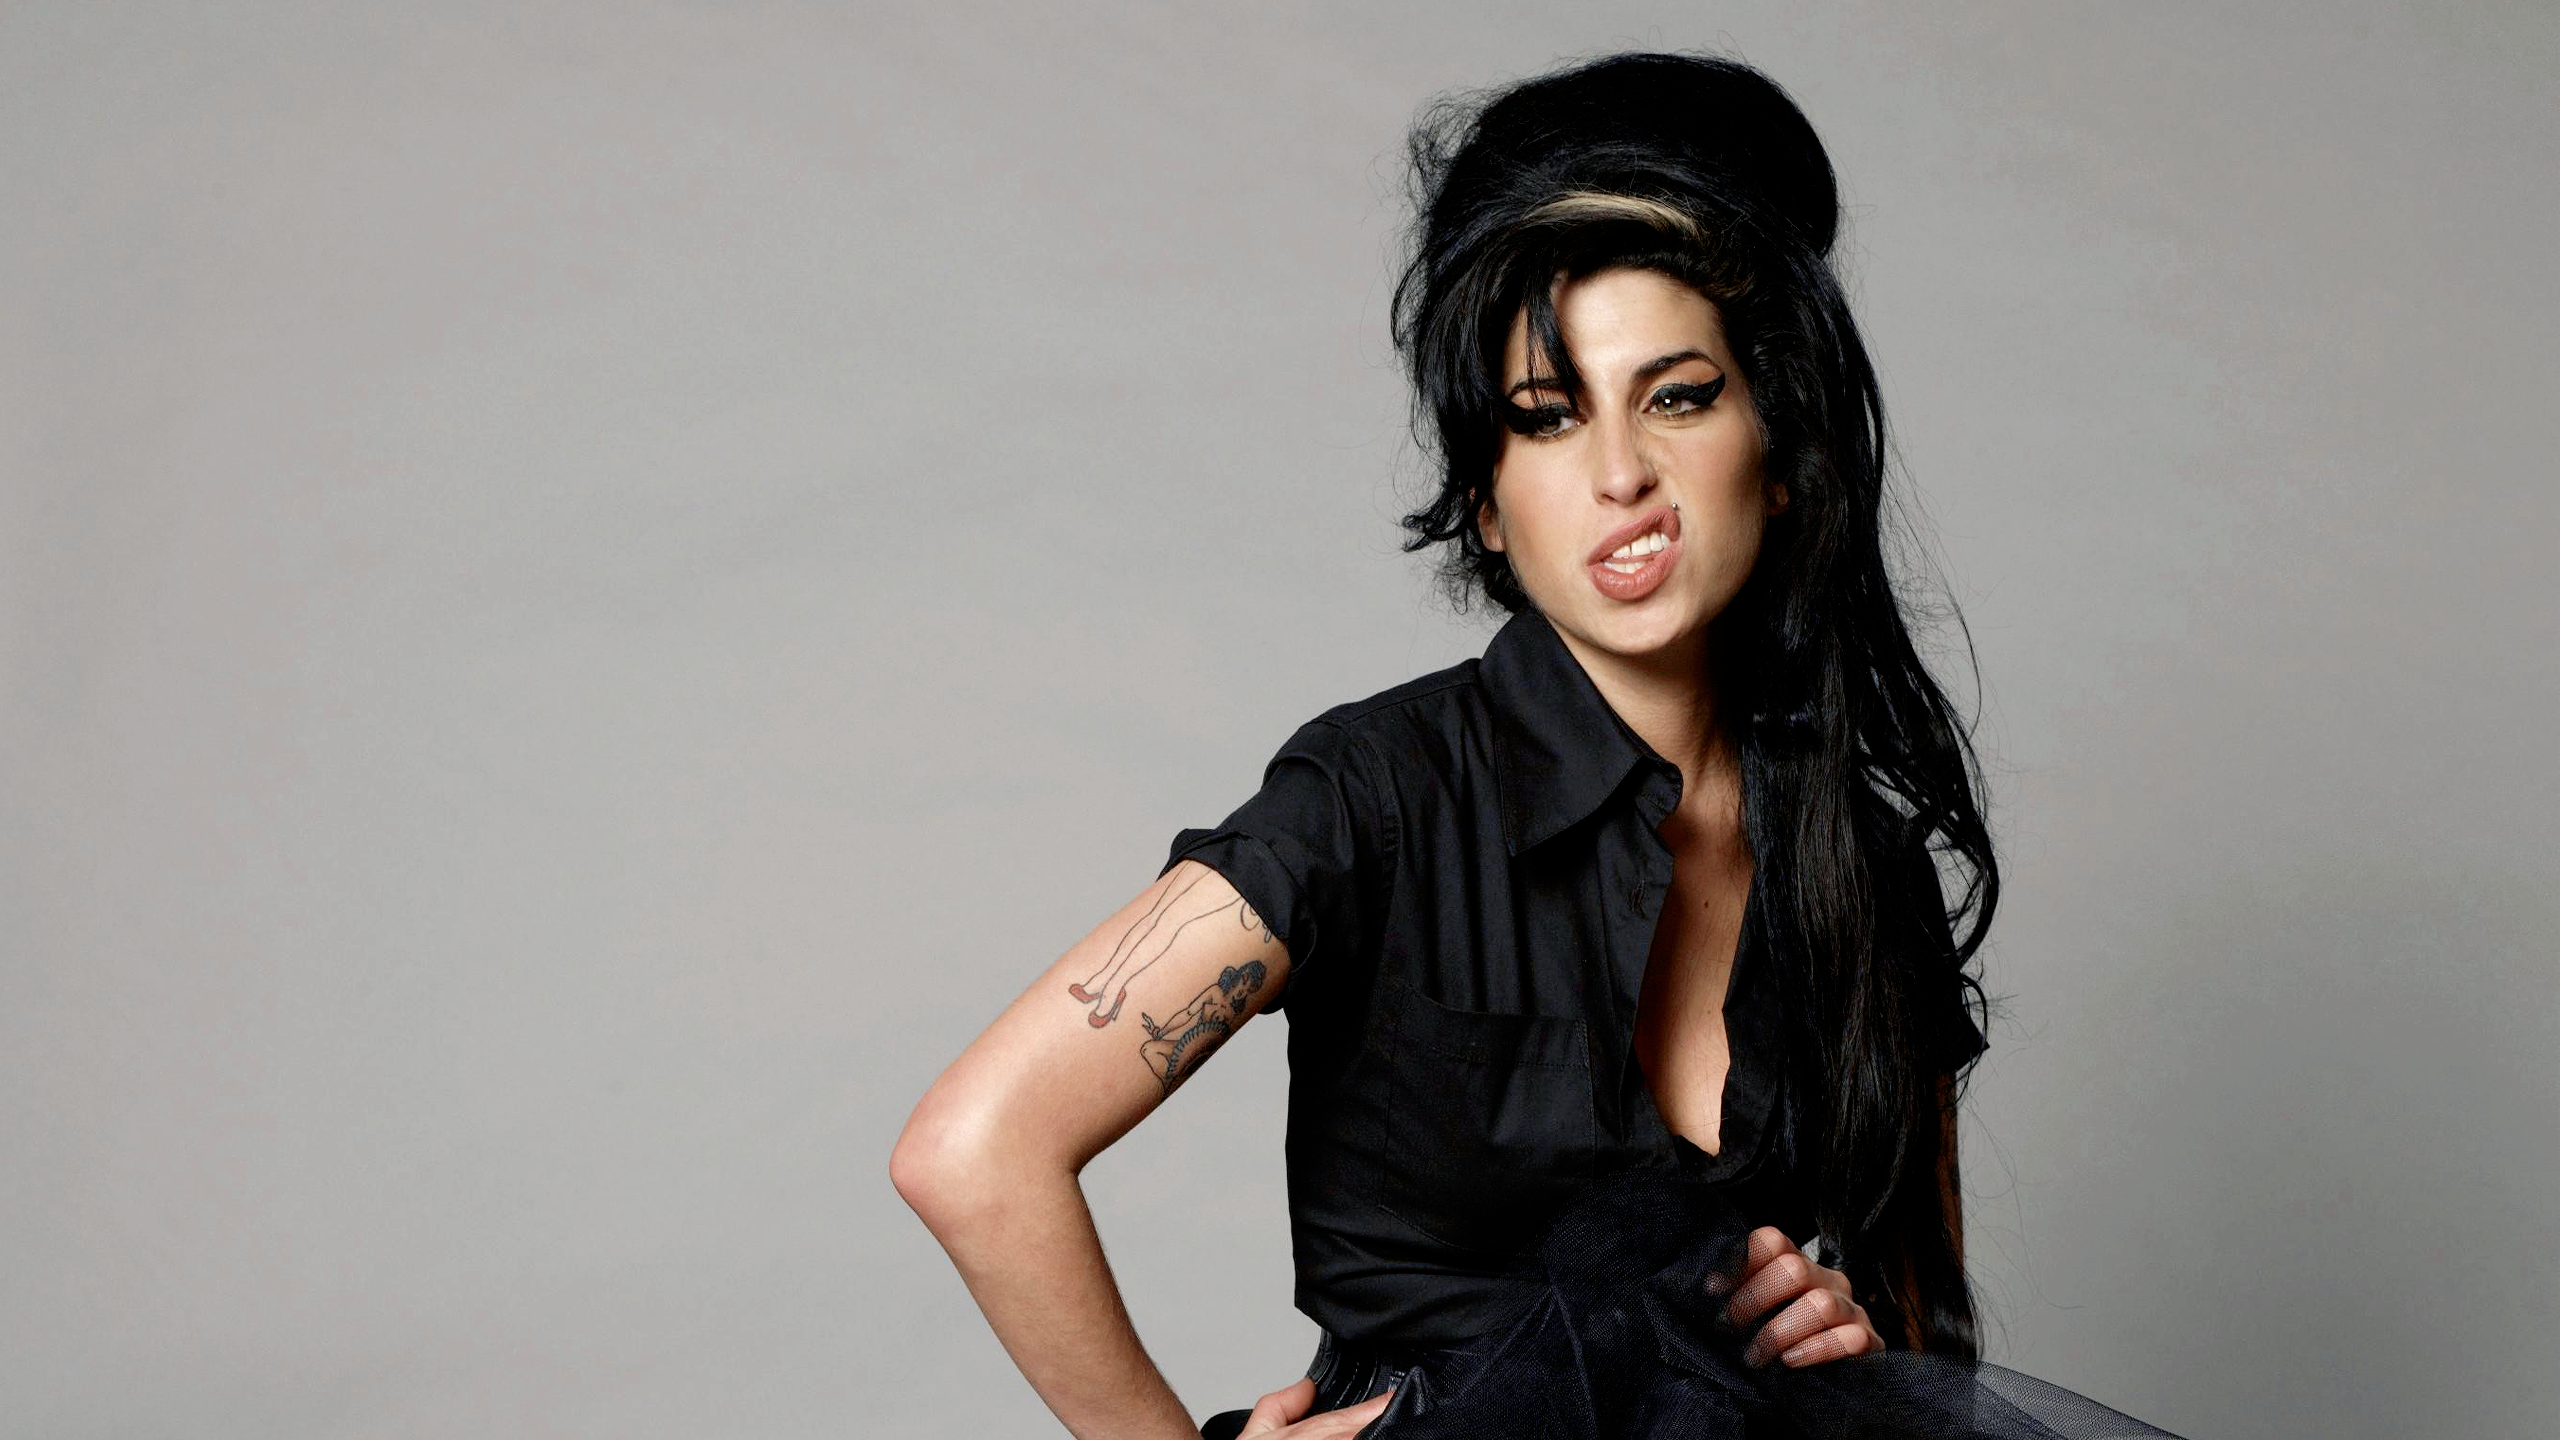 2560x1440 Amy Winehouse wallpaper for computer